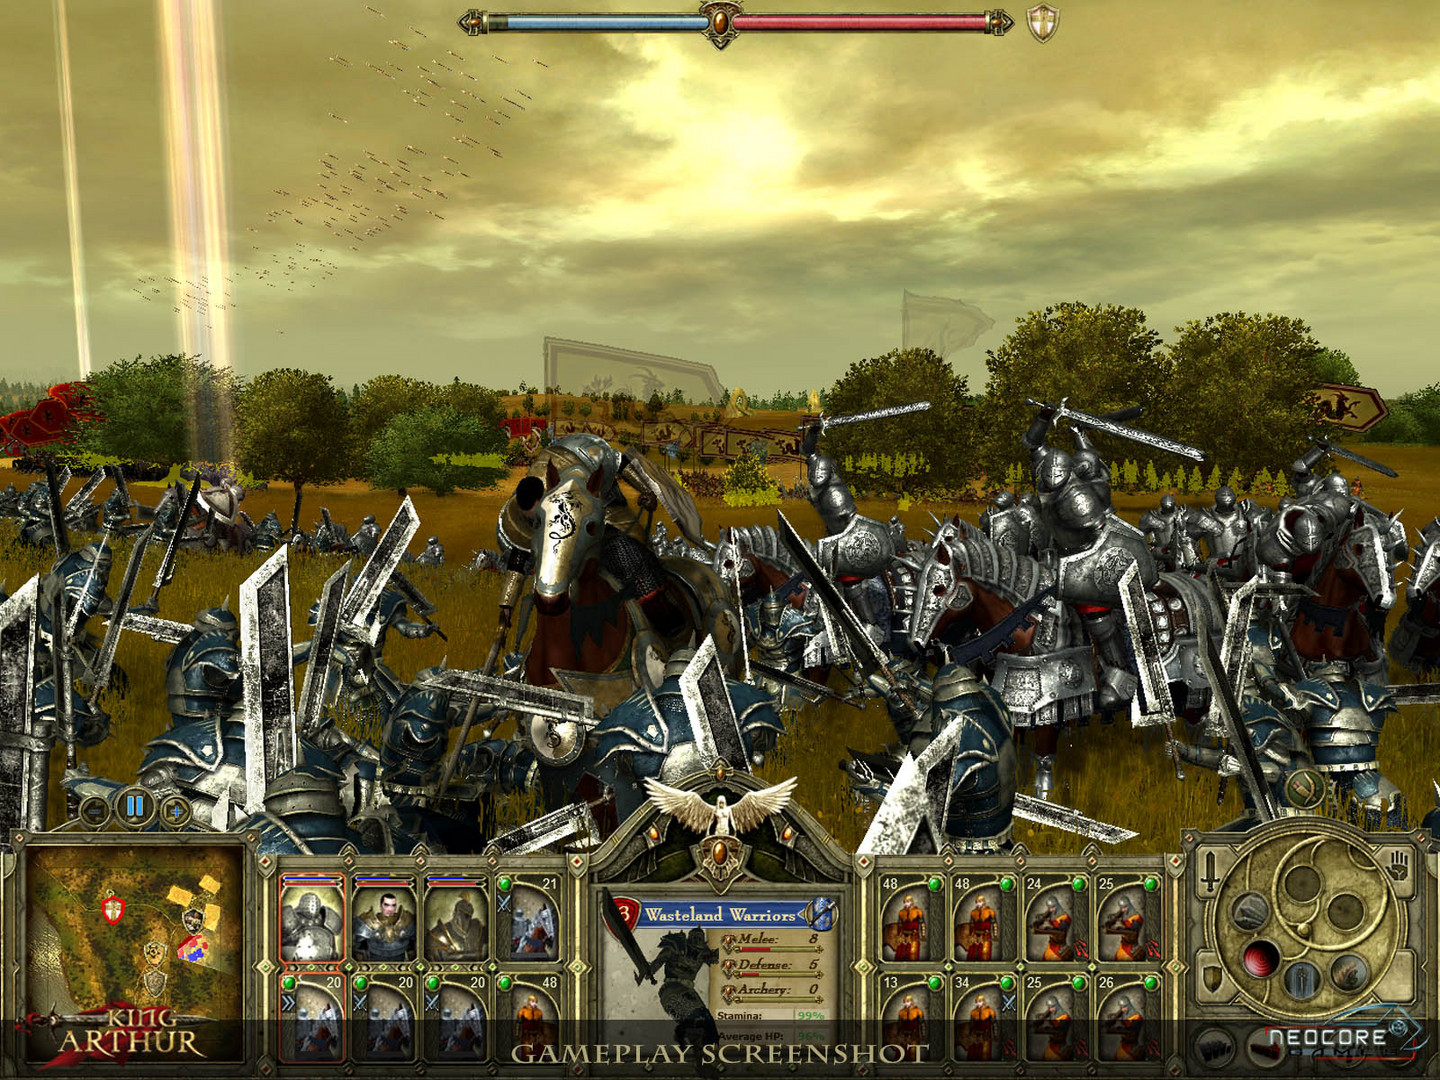 download king arthur ii the roleplaying wargame